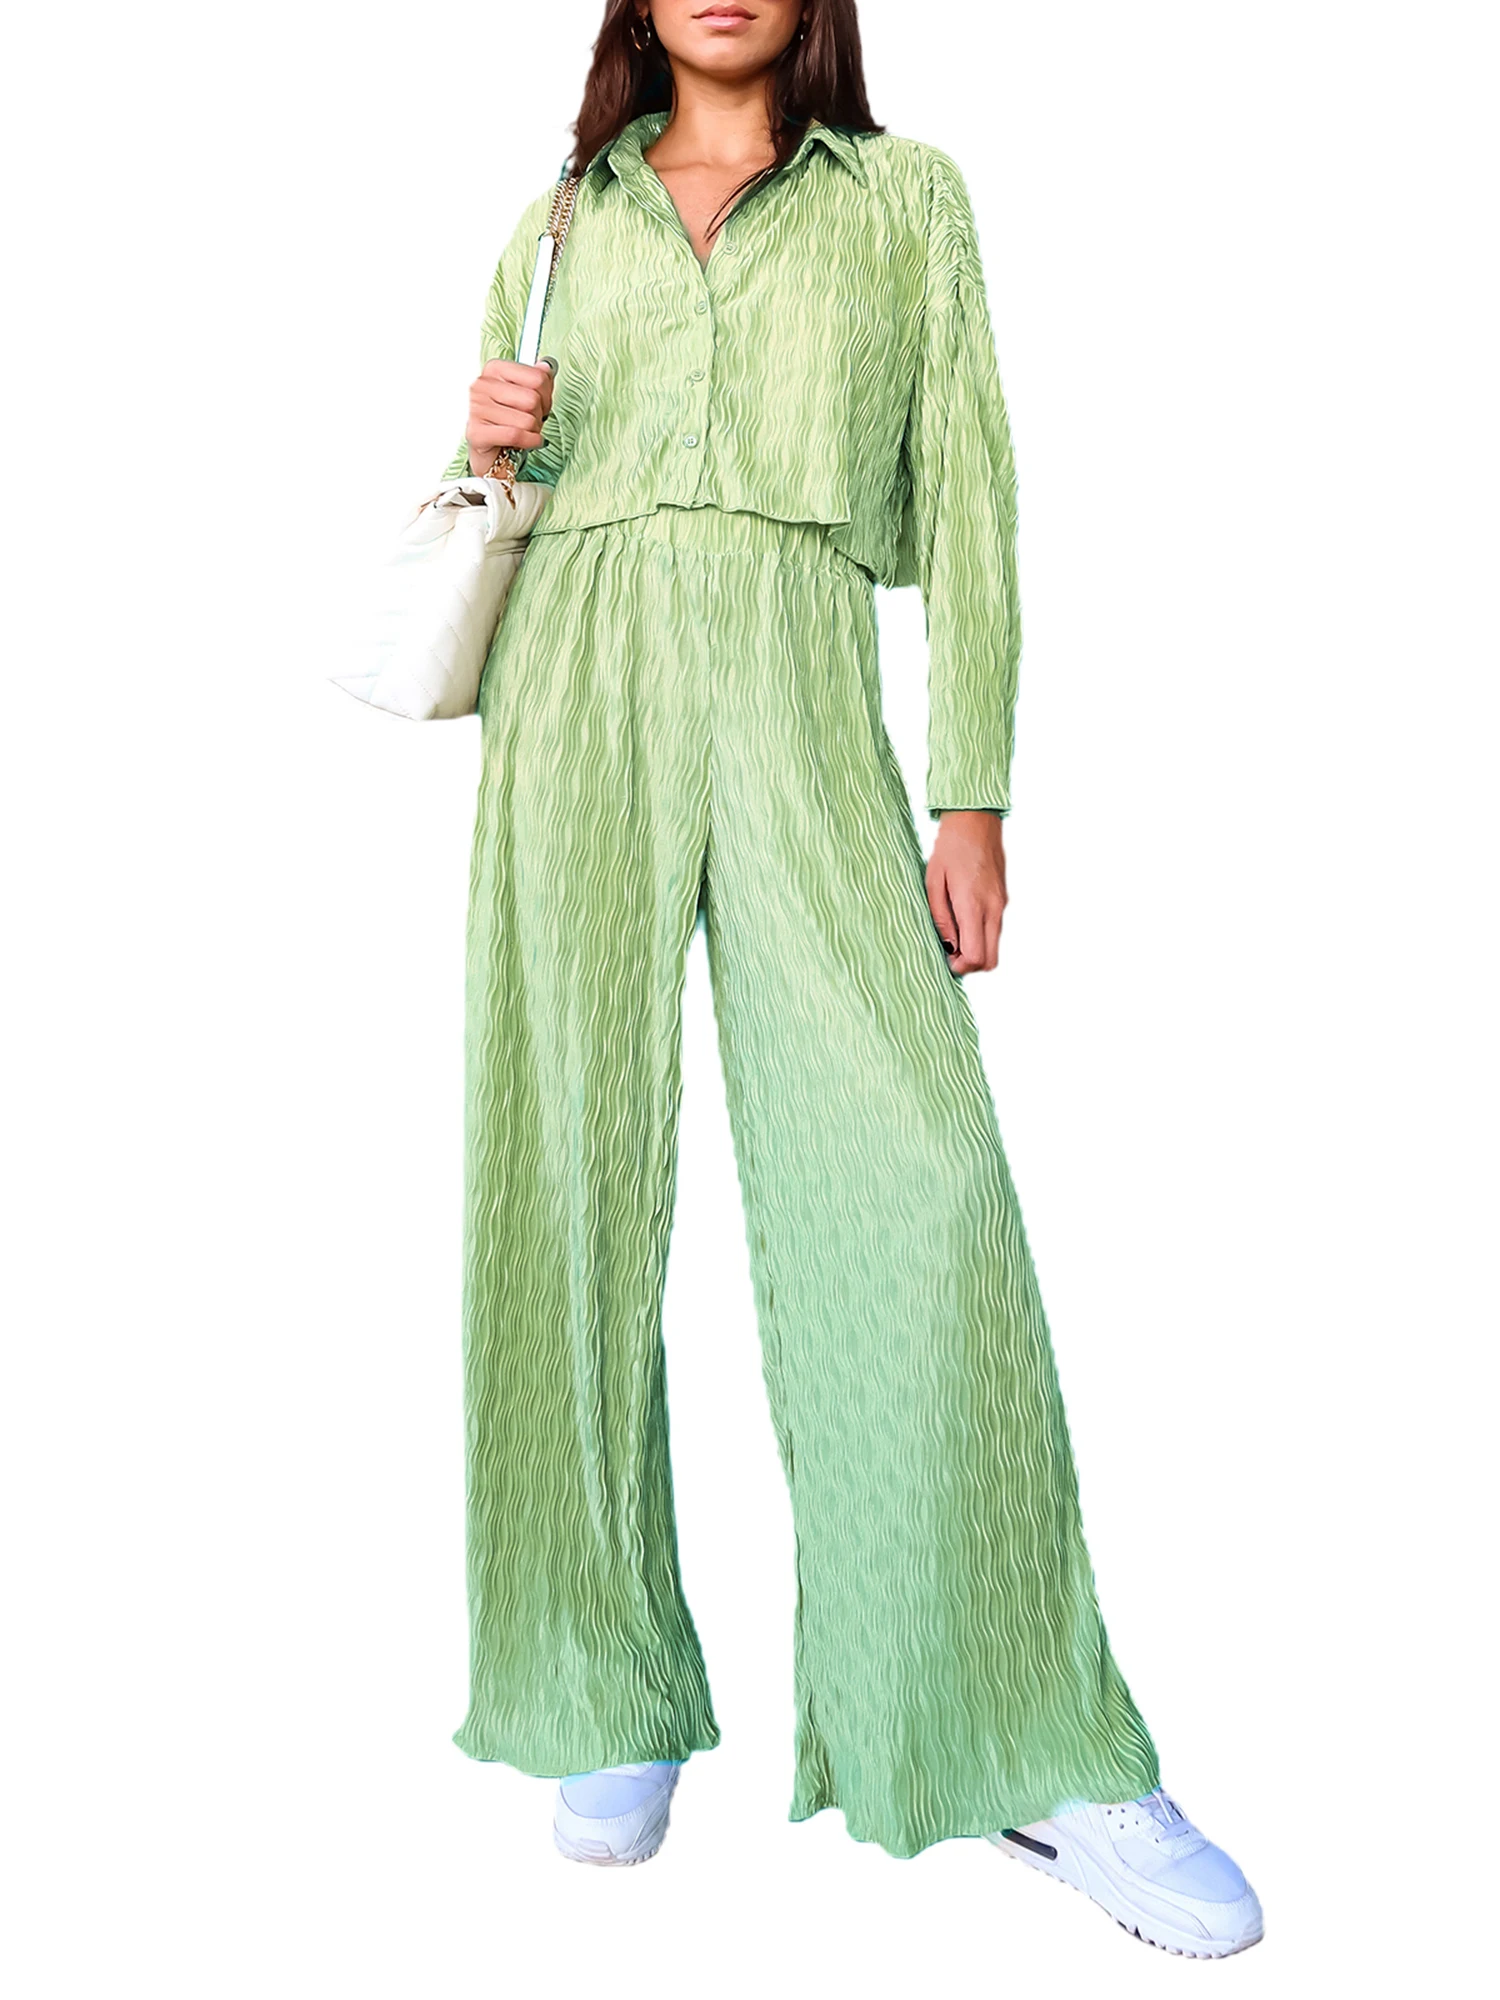 Luxurious Feather-Trimmed Silk Satin Pajama Set for Women - Elegant Button-Down Sleepwear and Loungewear for Brides and Beyond